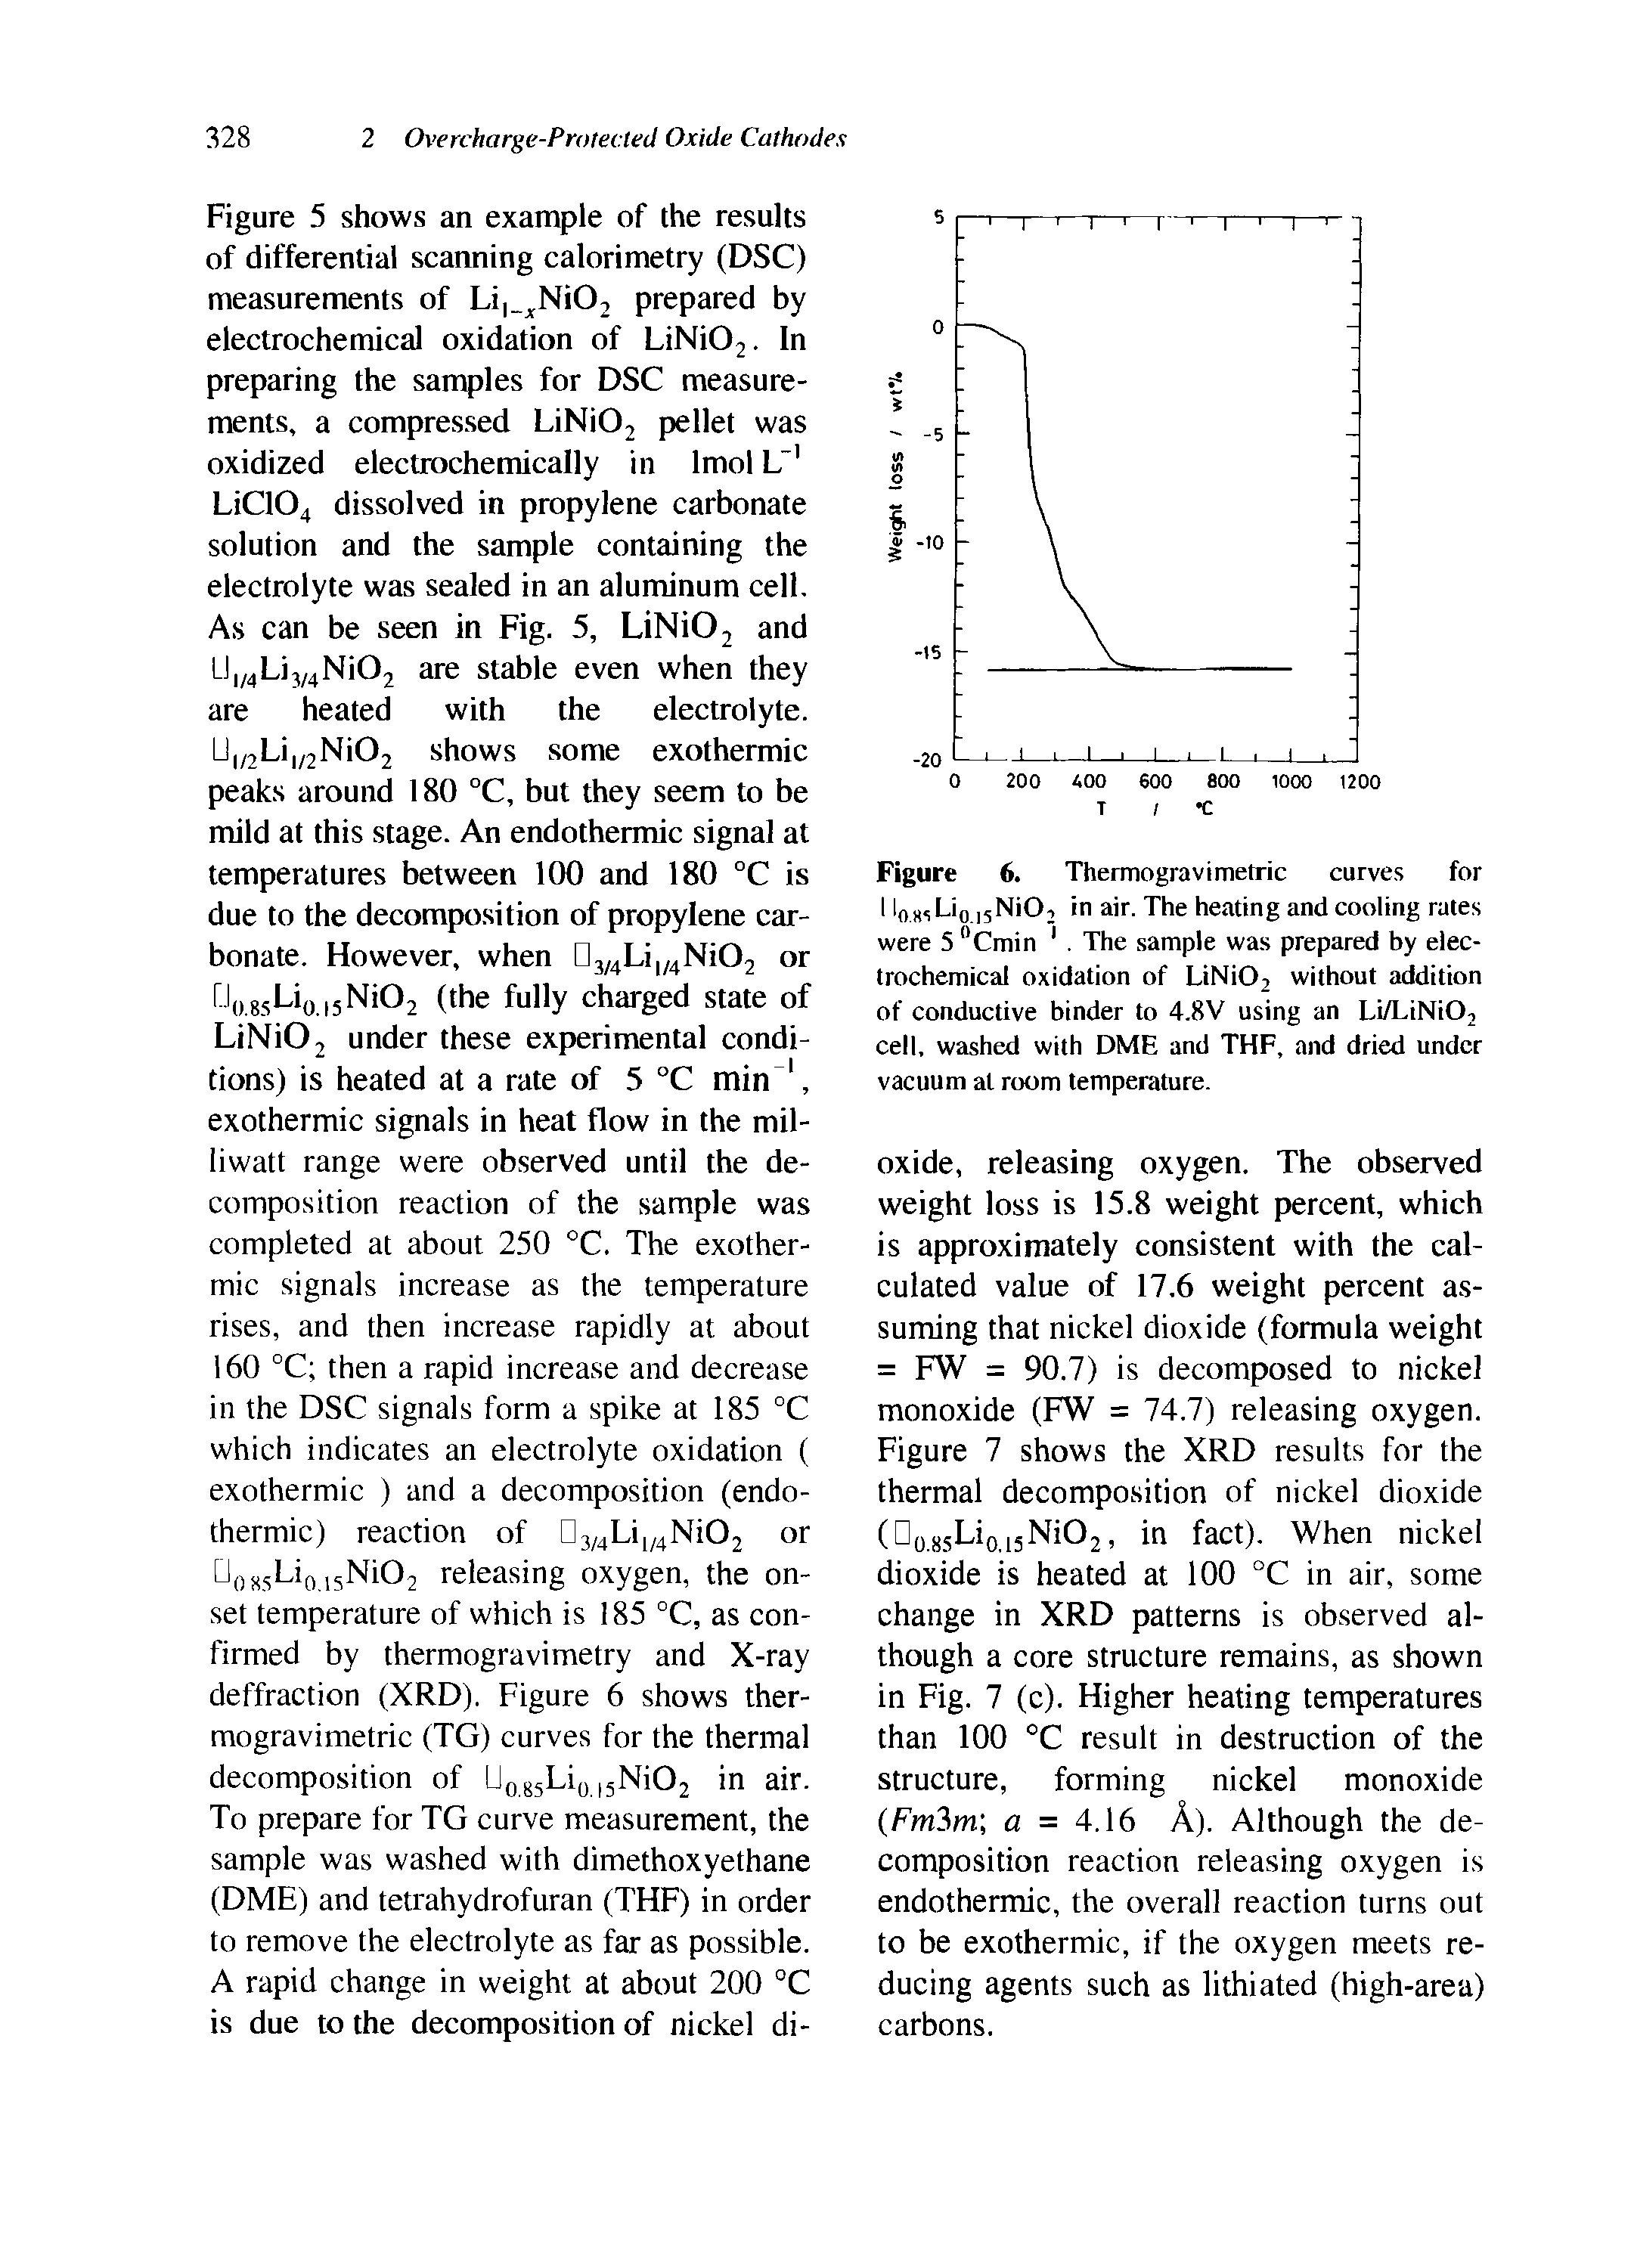 Figure 6. Thermogravimetric curves for I l08,Li0 ]5NiOi in air. The heating and cooling rates were 5 °Cmin 1. The sample was prepared by electrochemical oxidation of LiNi02 without addition of conductive binder to 4.8V using an Li/LiNiO, cell, washed with DME and THF, and dried under vacuum at room temperature.